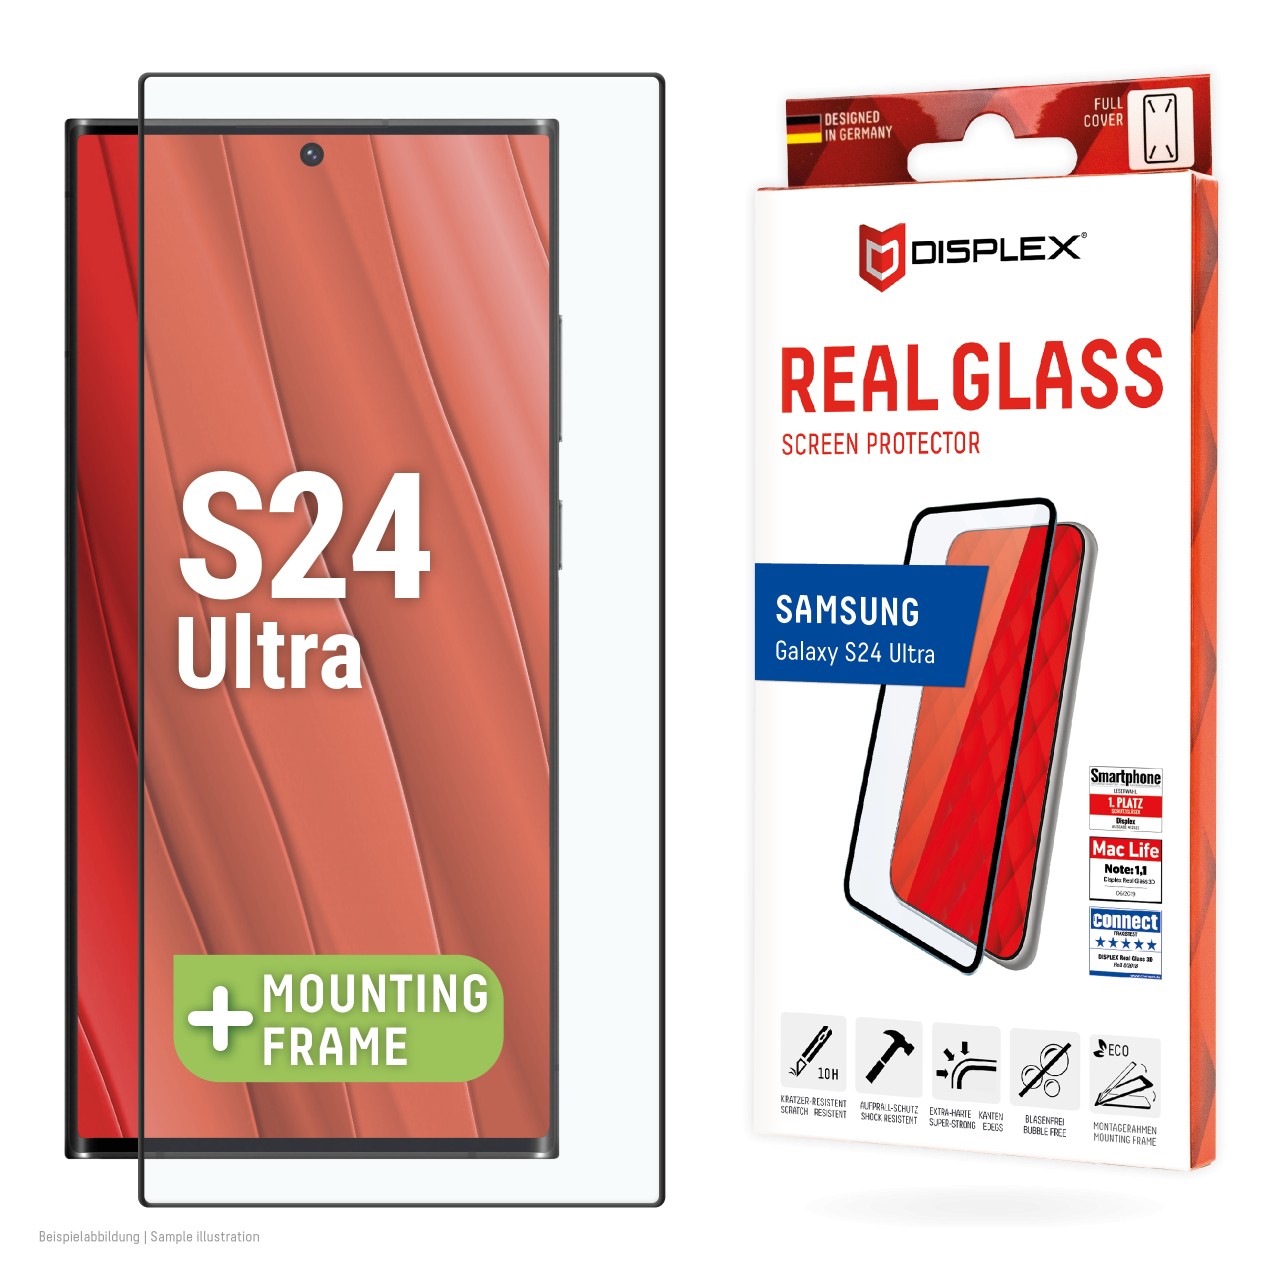 Samsung Galaxy S24 Ultra Full Cover Screen Protector